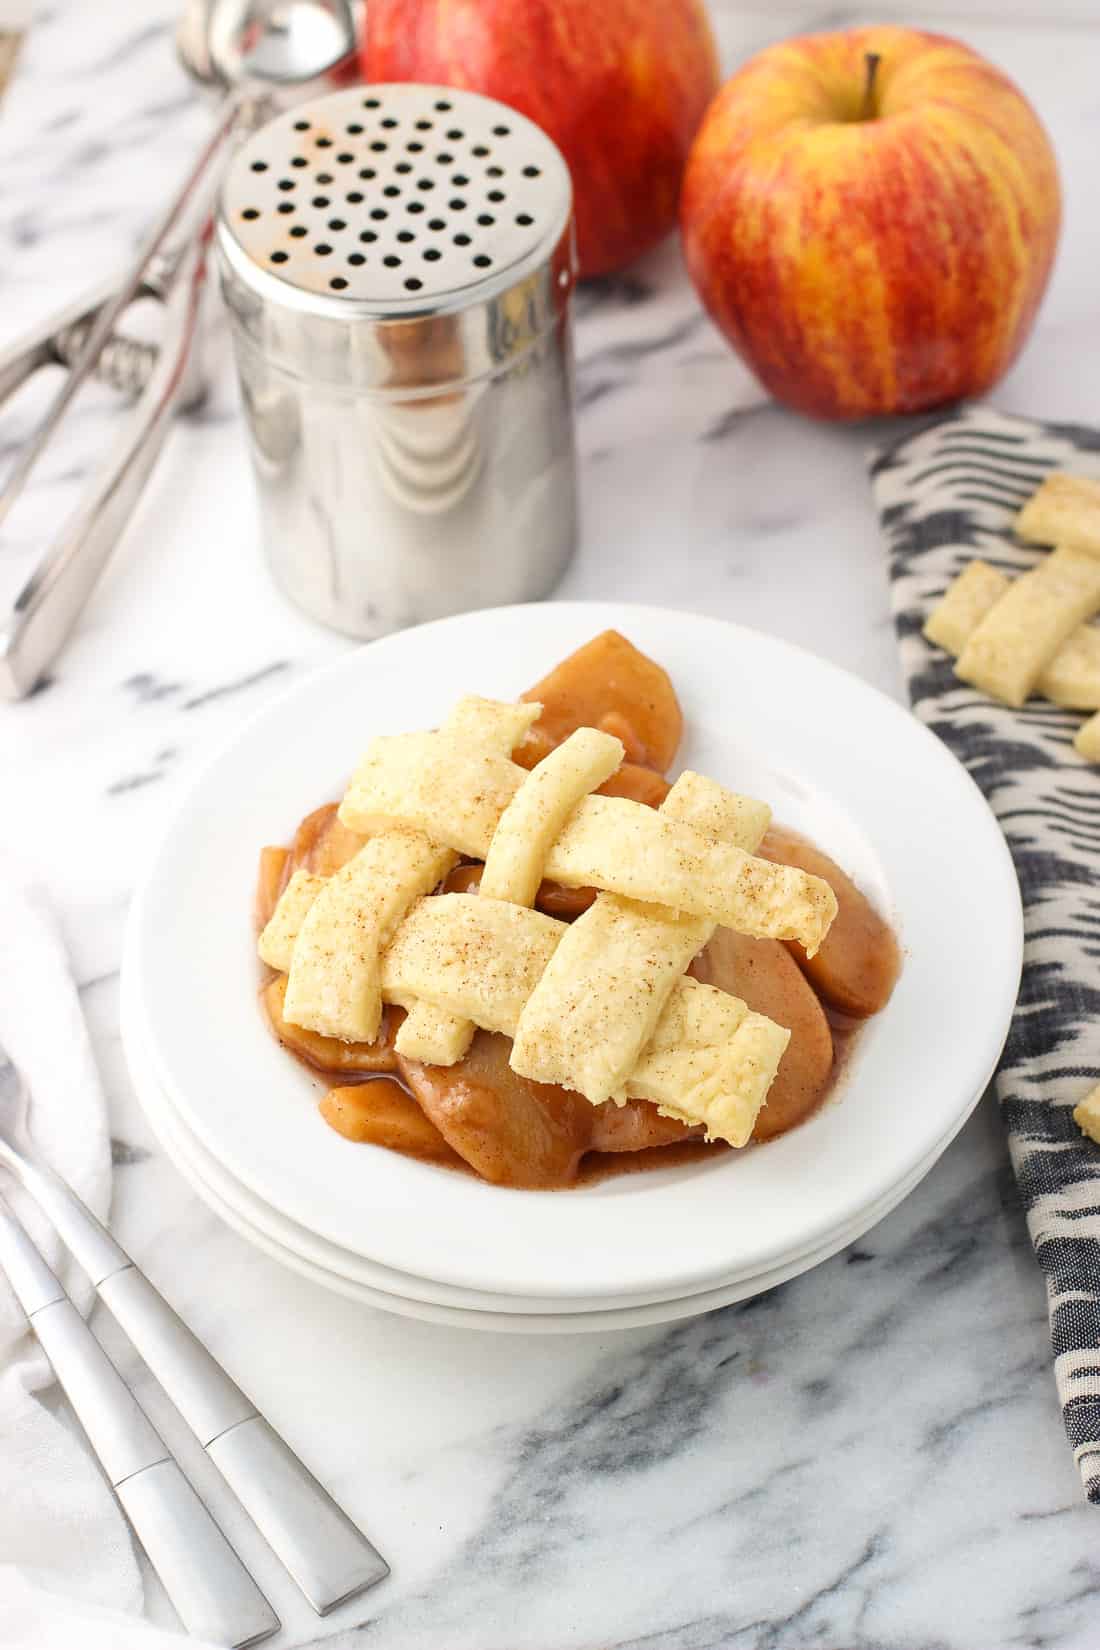 A serving of slow cooker apples on a dessert plate with a lattice pie topping.